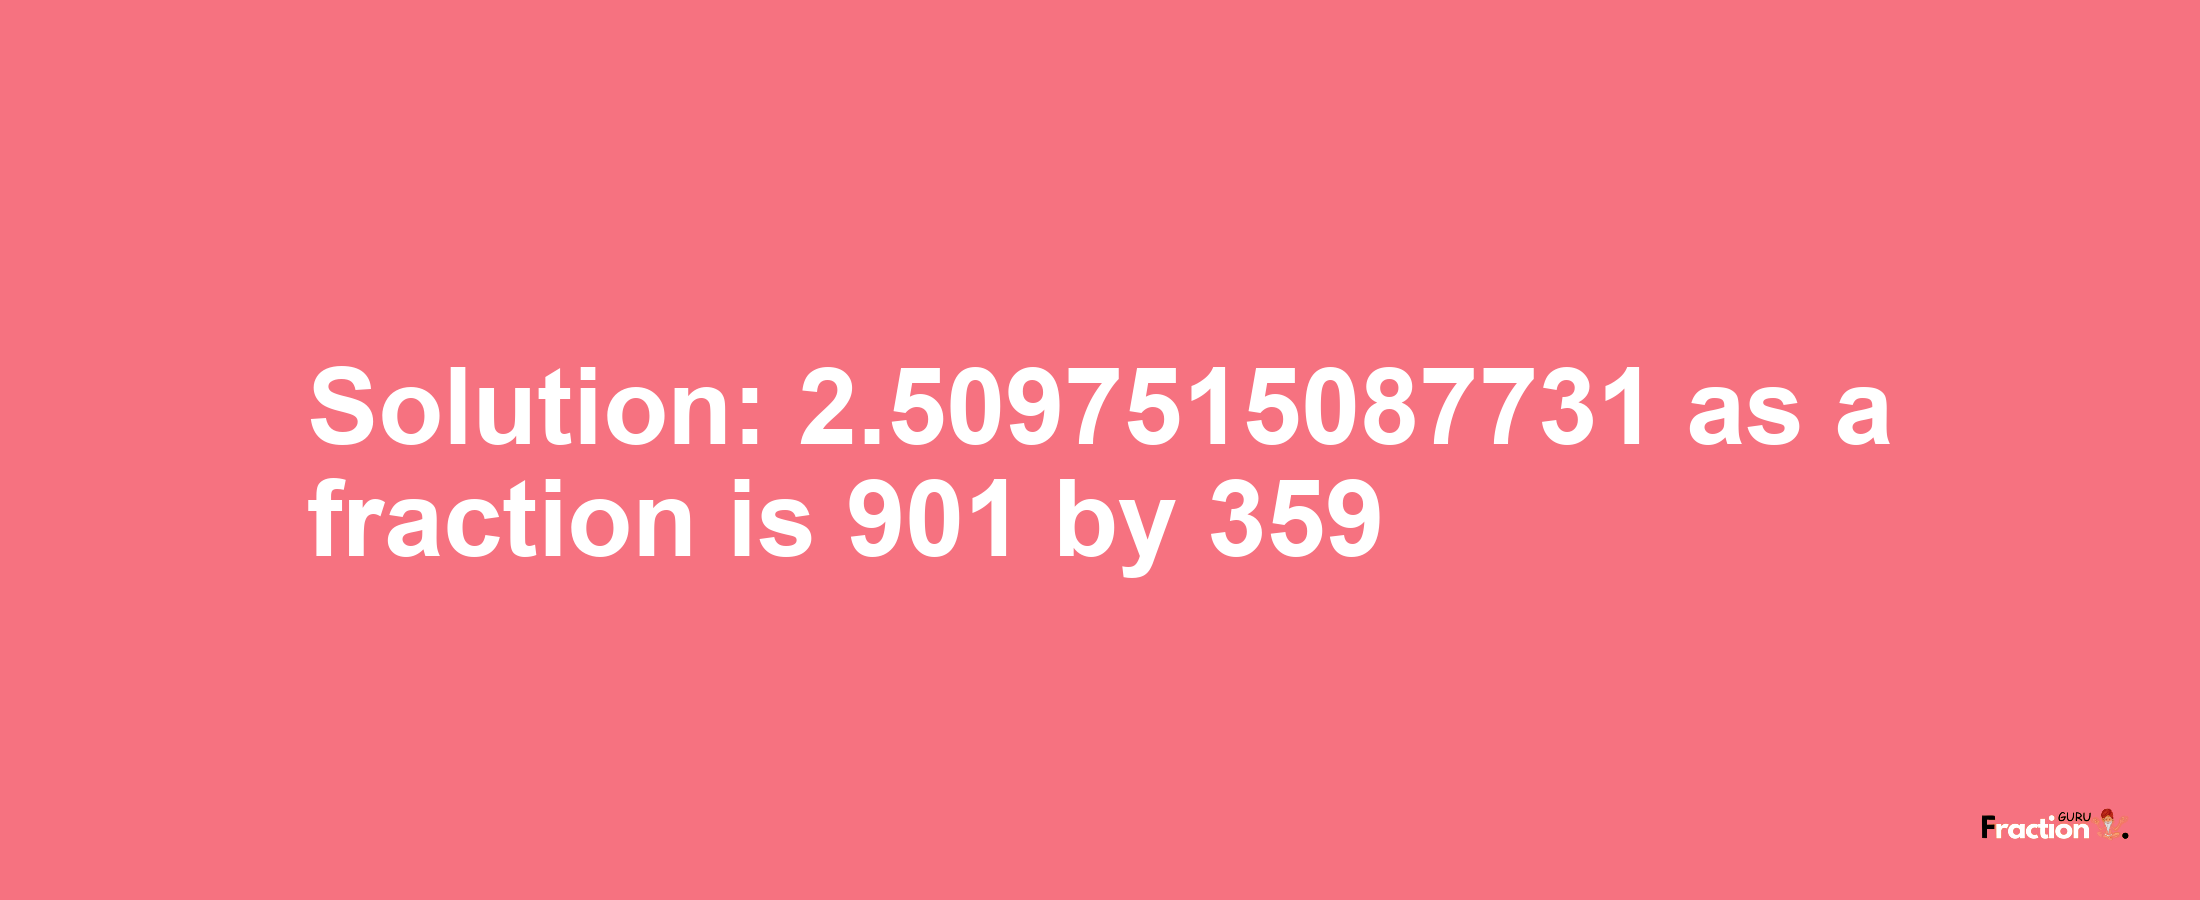 Solution:2.5097515087731 as a fraction is 901/359